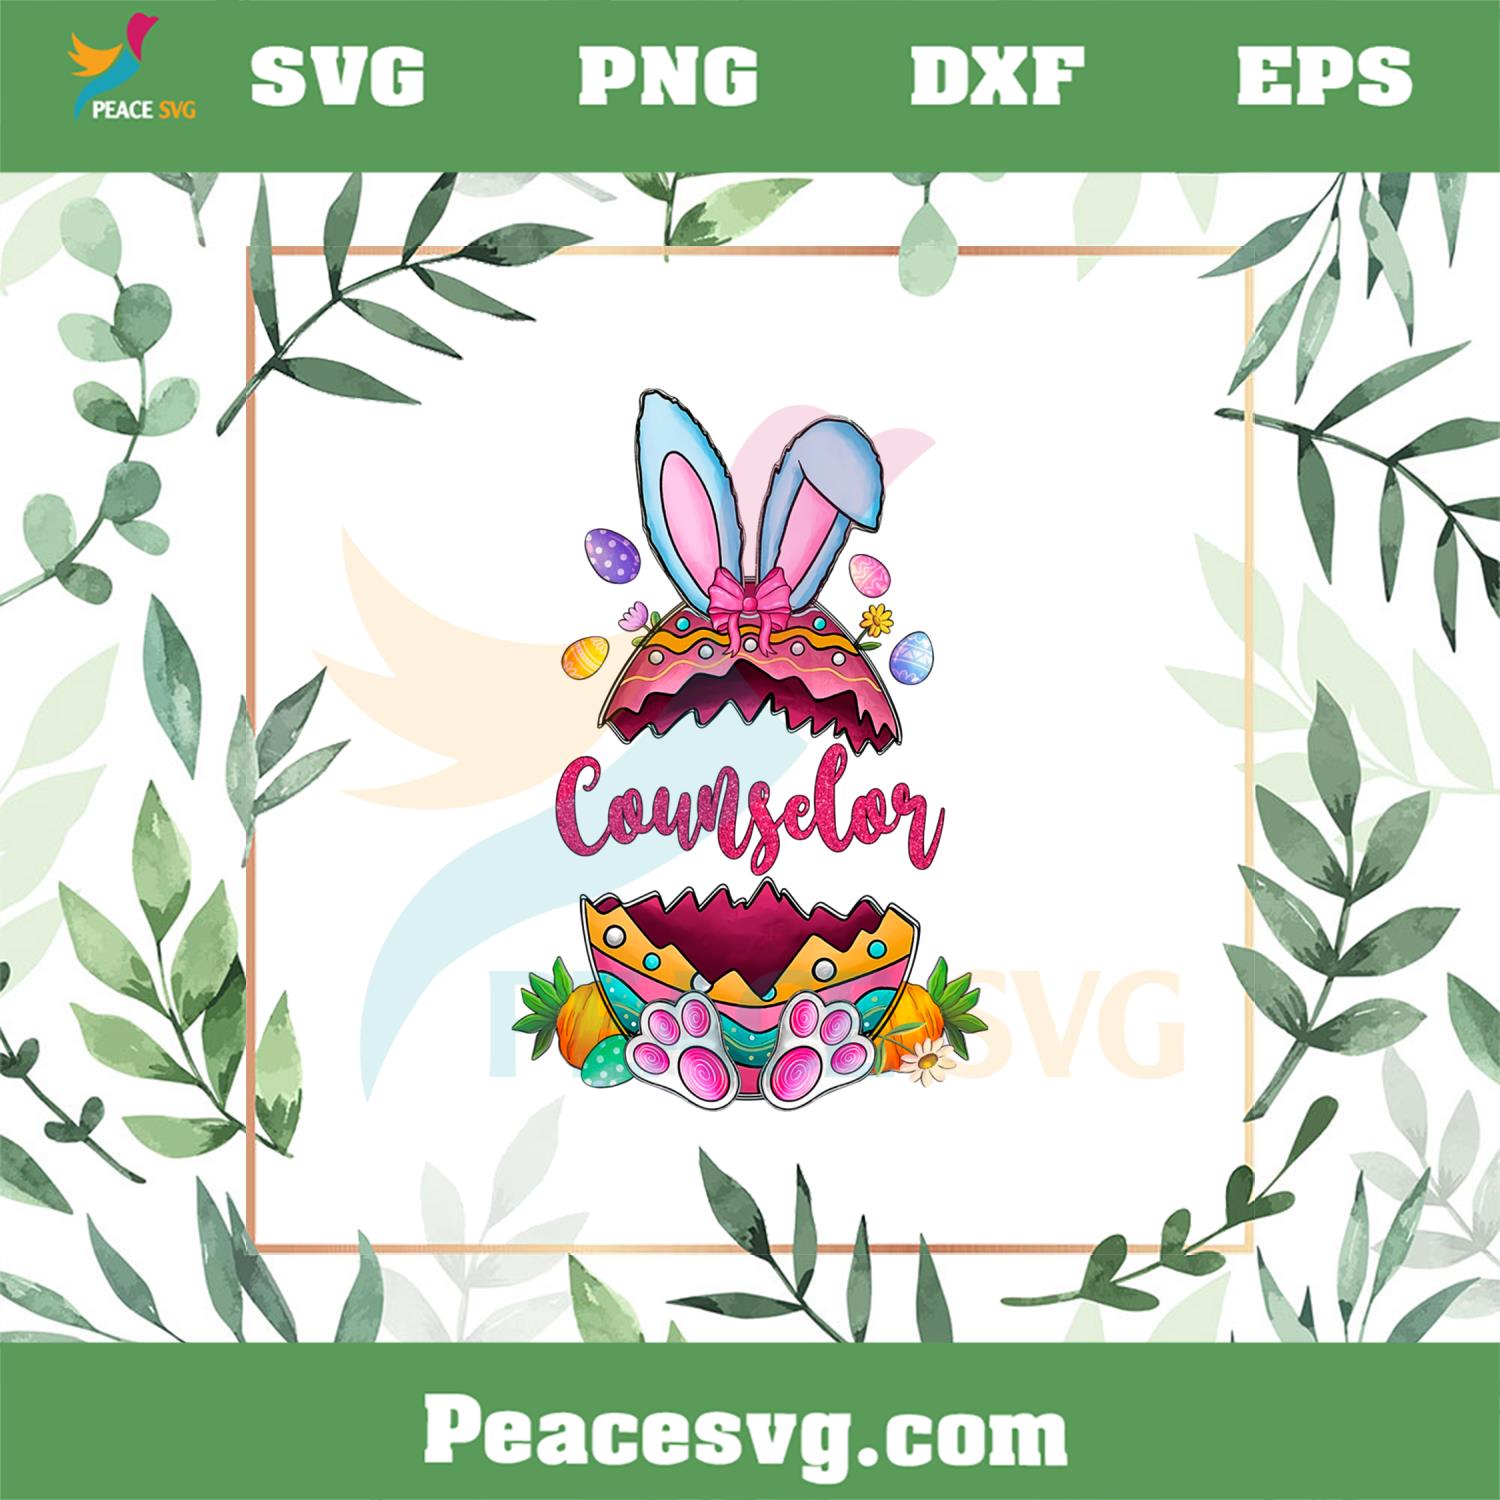 Counselor Easter Egg Bunny Eat PNG Sublimation Designs